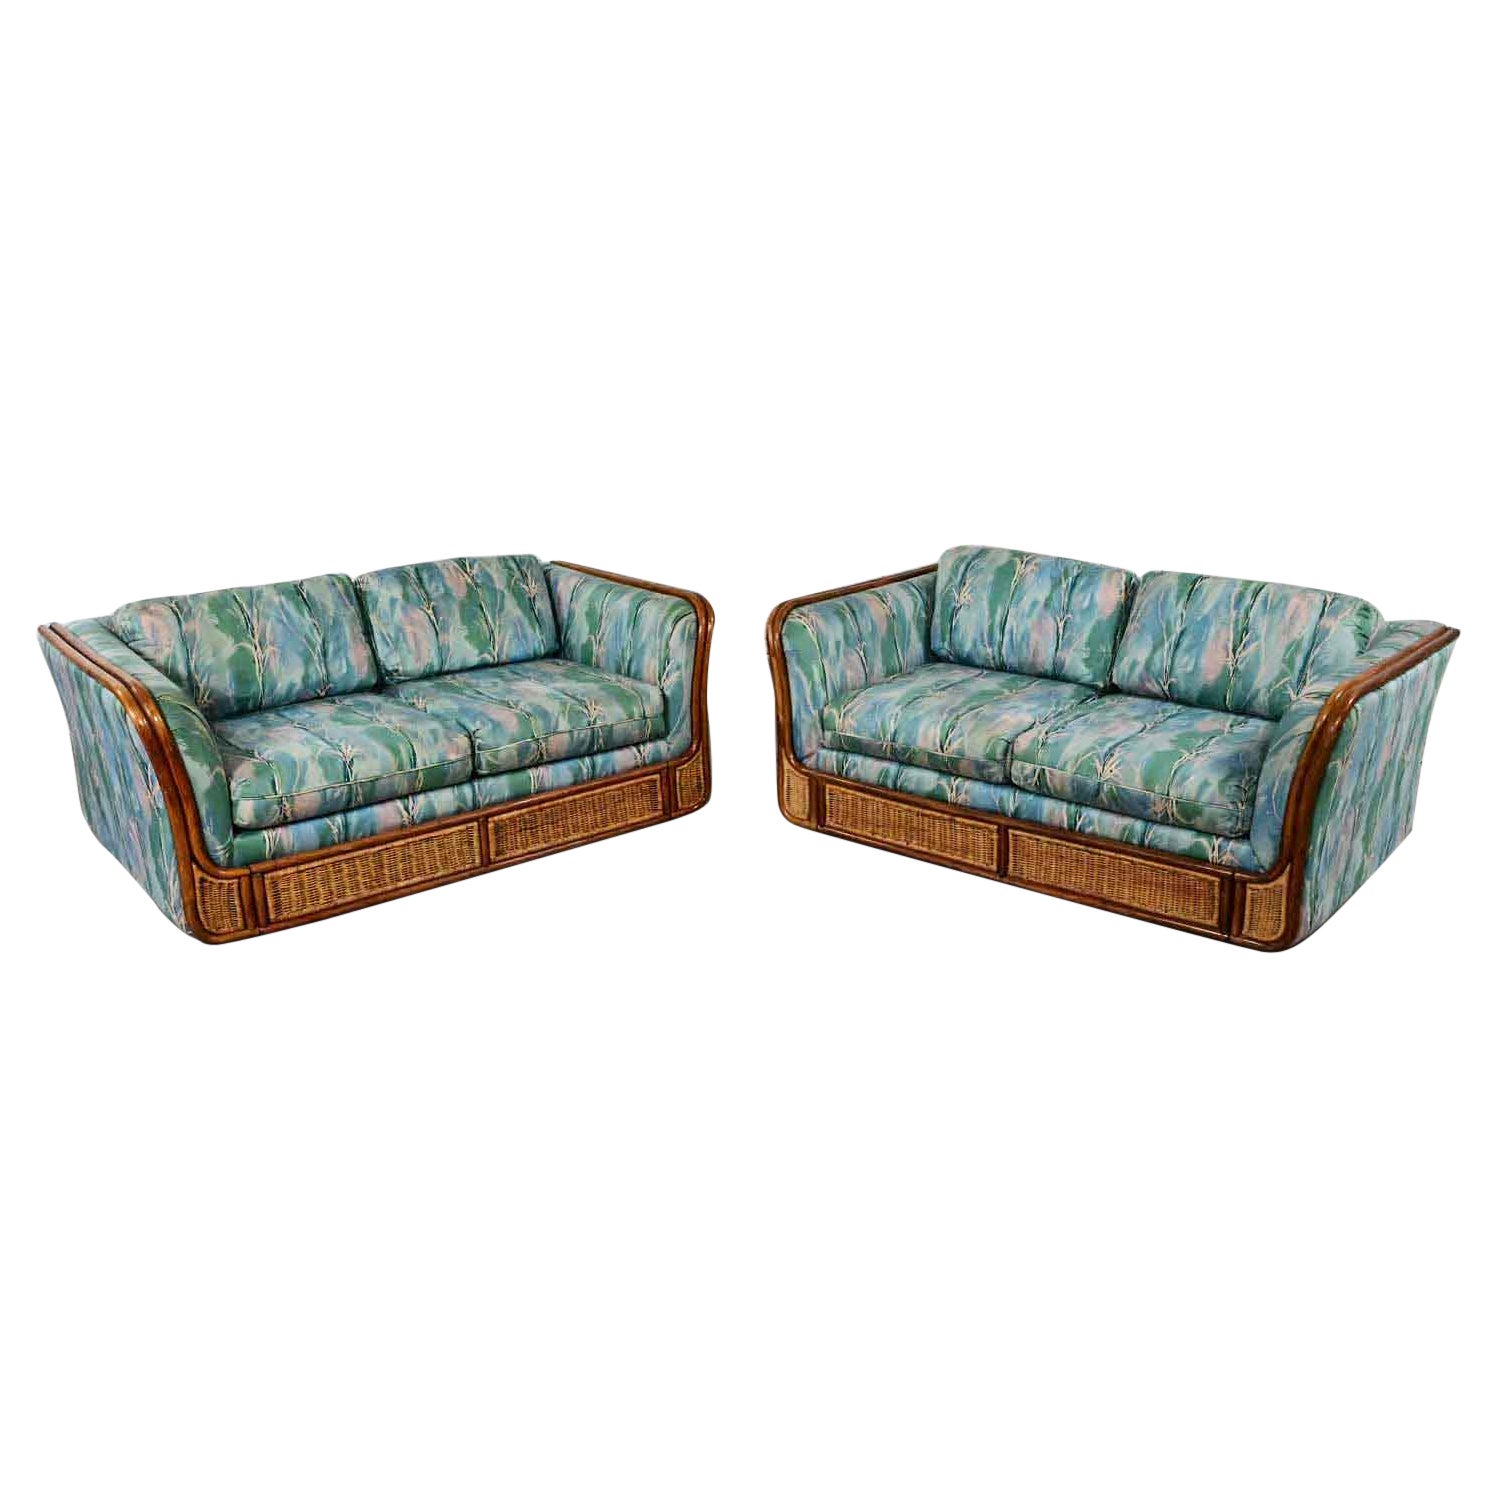 Late 20th Century Boho Chic Rattan & Wicker Tuxedo Style Upholstered Loveseats For Sale